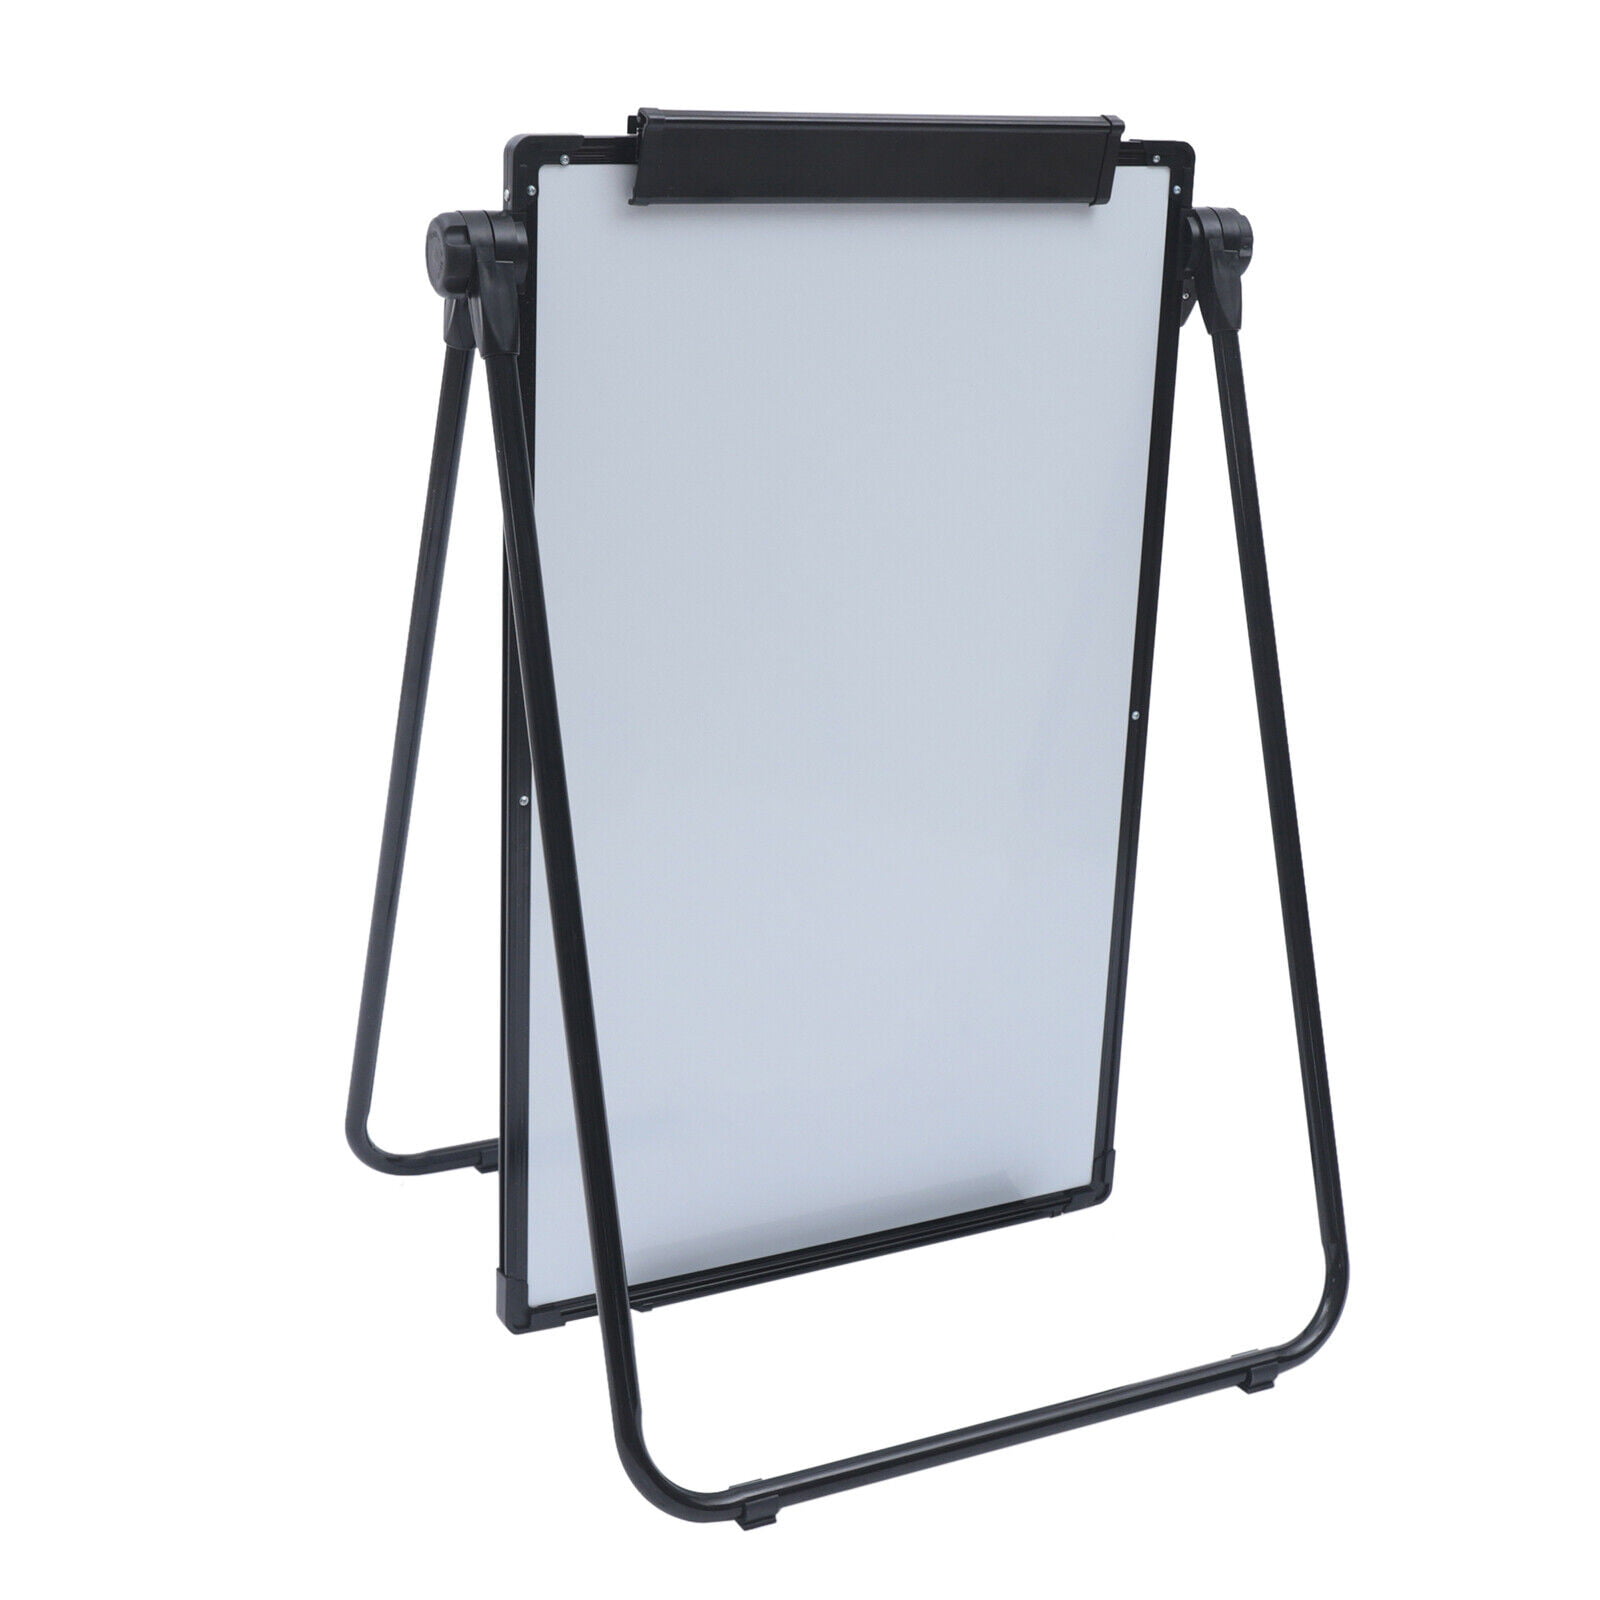 Mobile Dry Erase Board – 40x28 inches Magnetic Portable Whiteboard